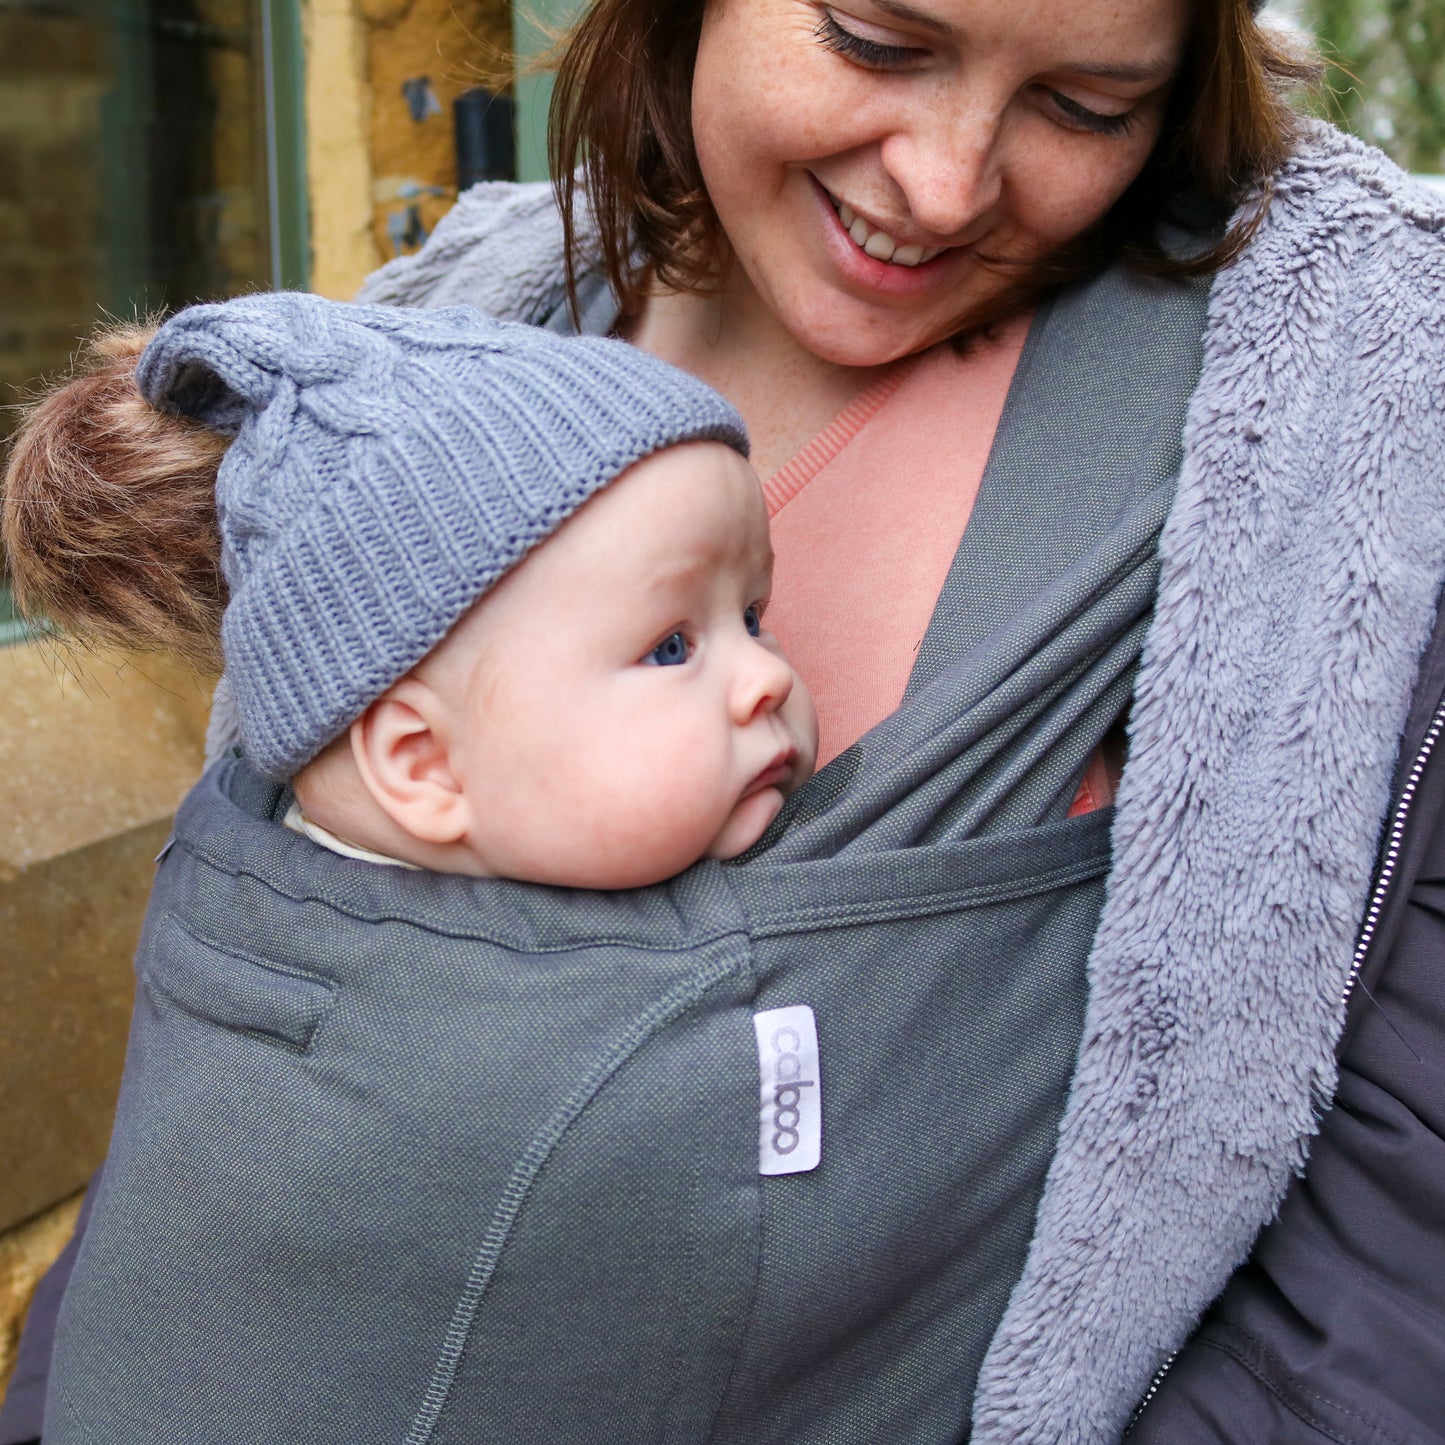 Caboo Cotton Blend Baby Carrier